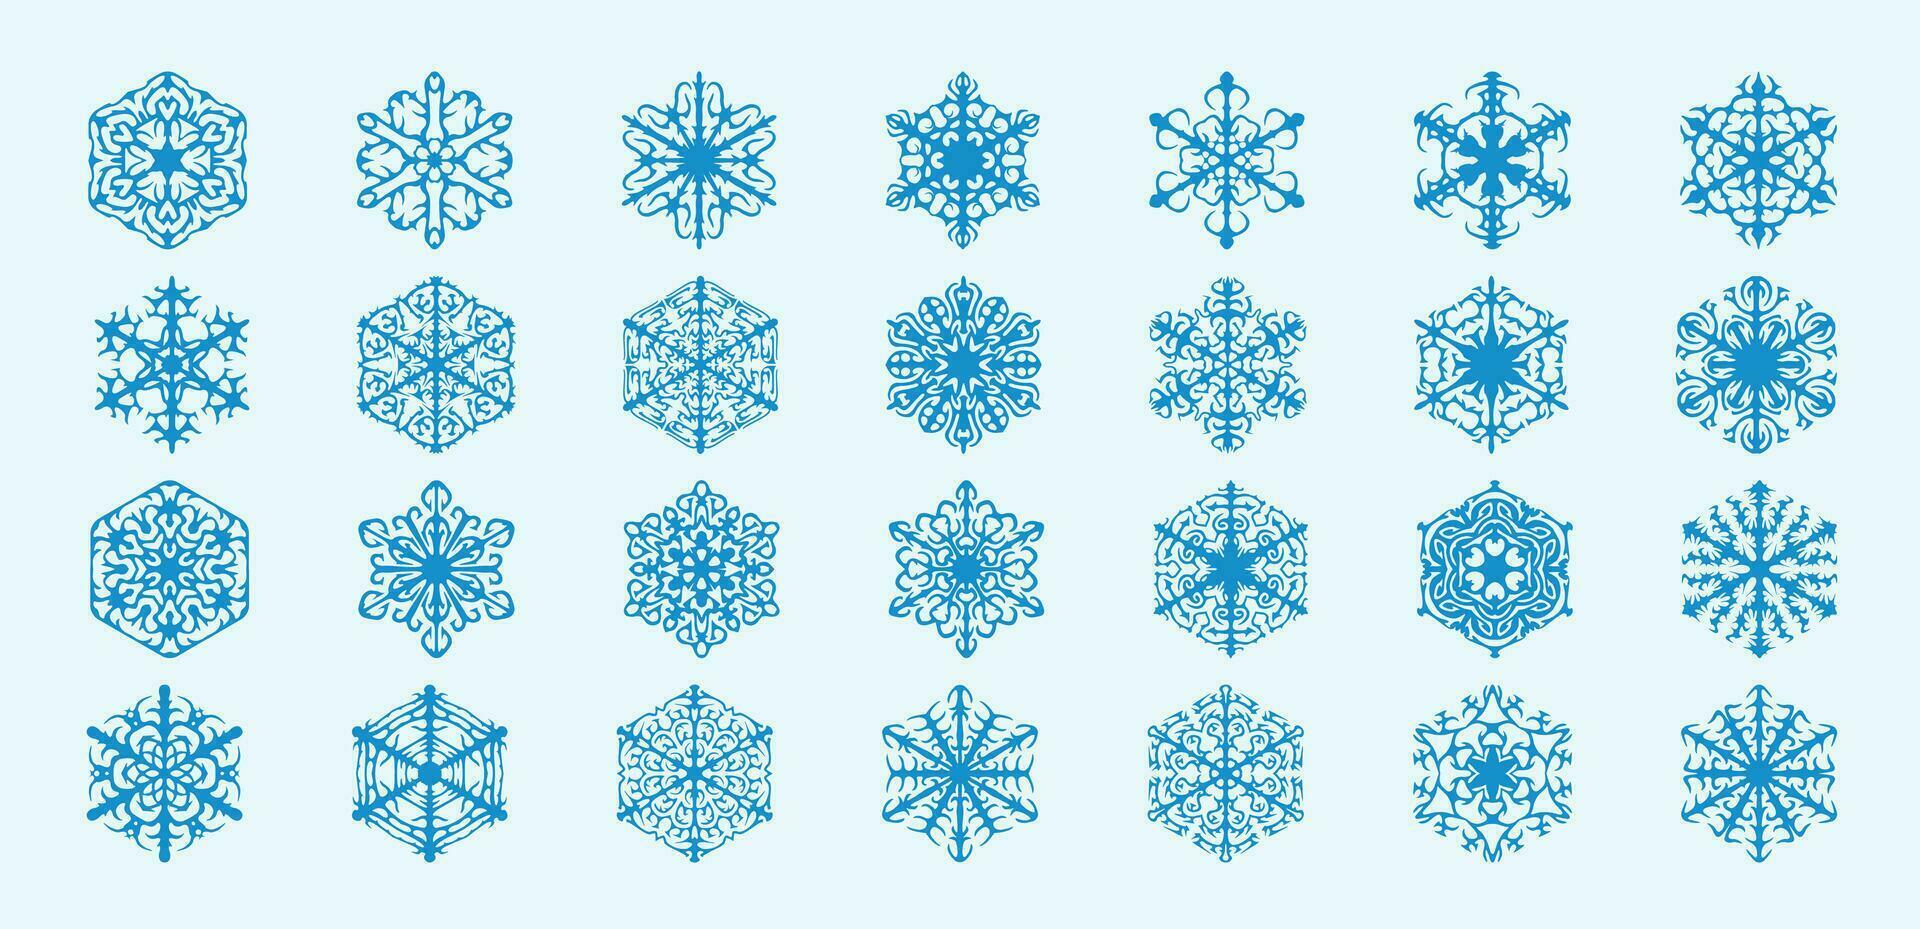 Big collection of blue snowflake icons vector